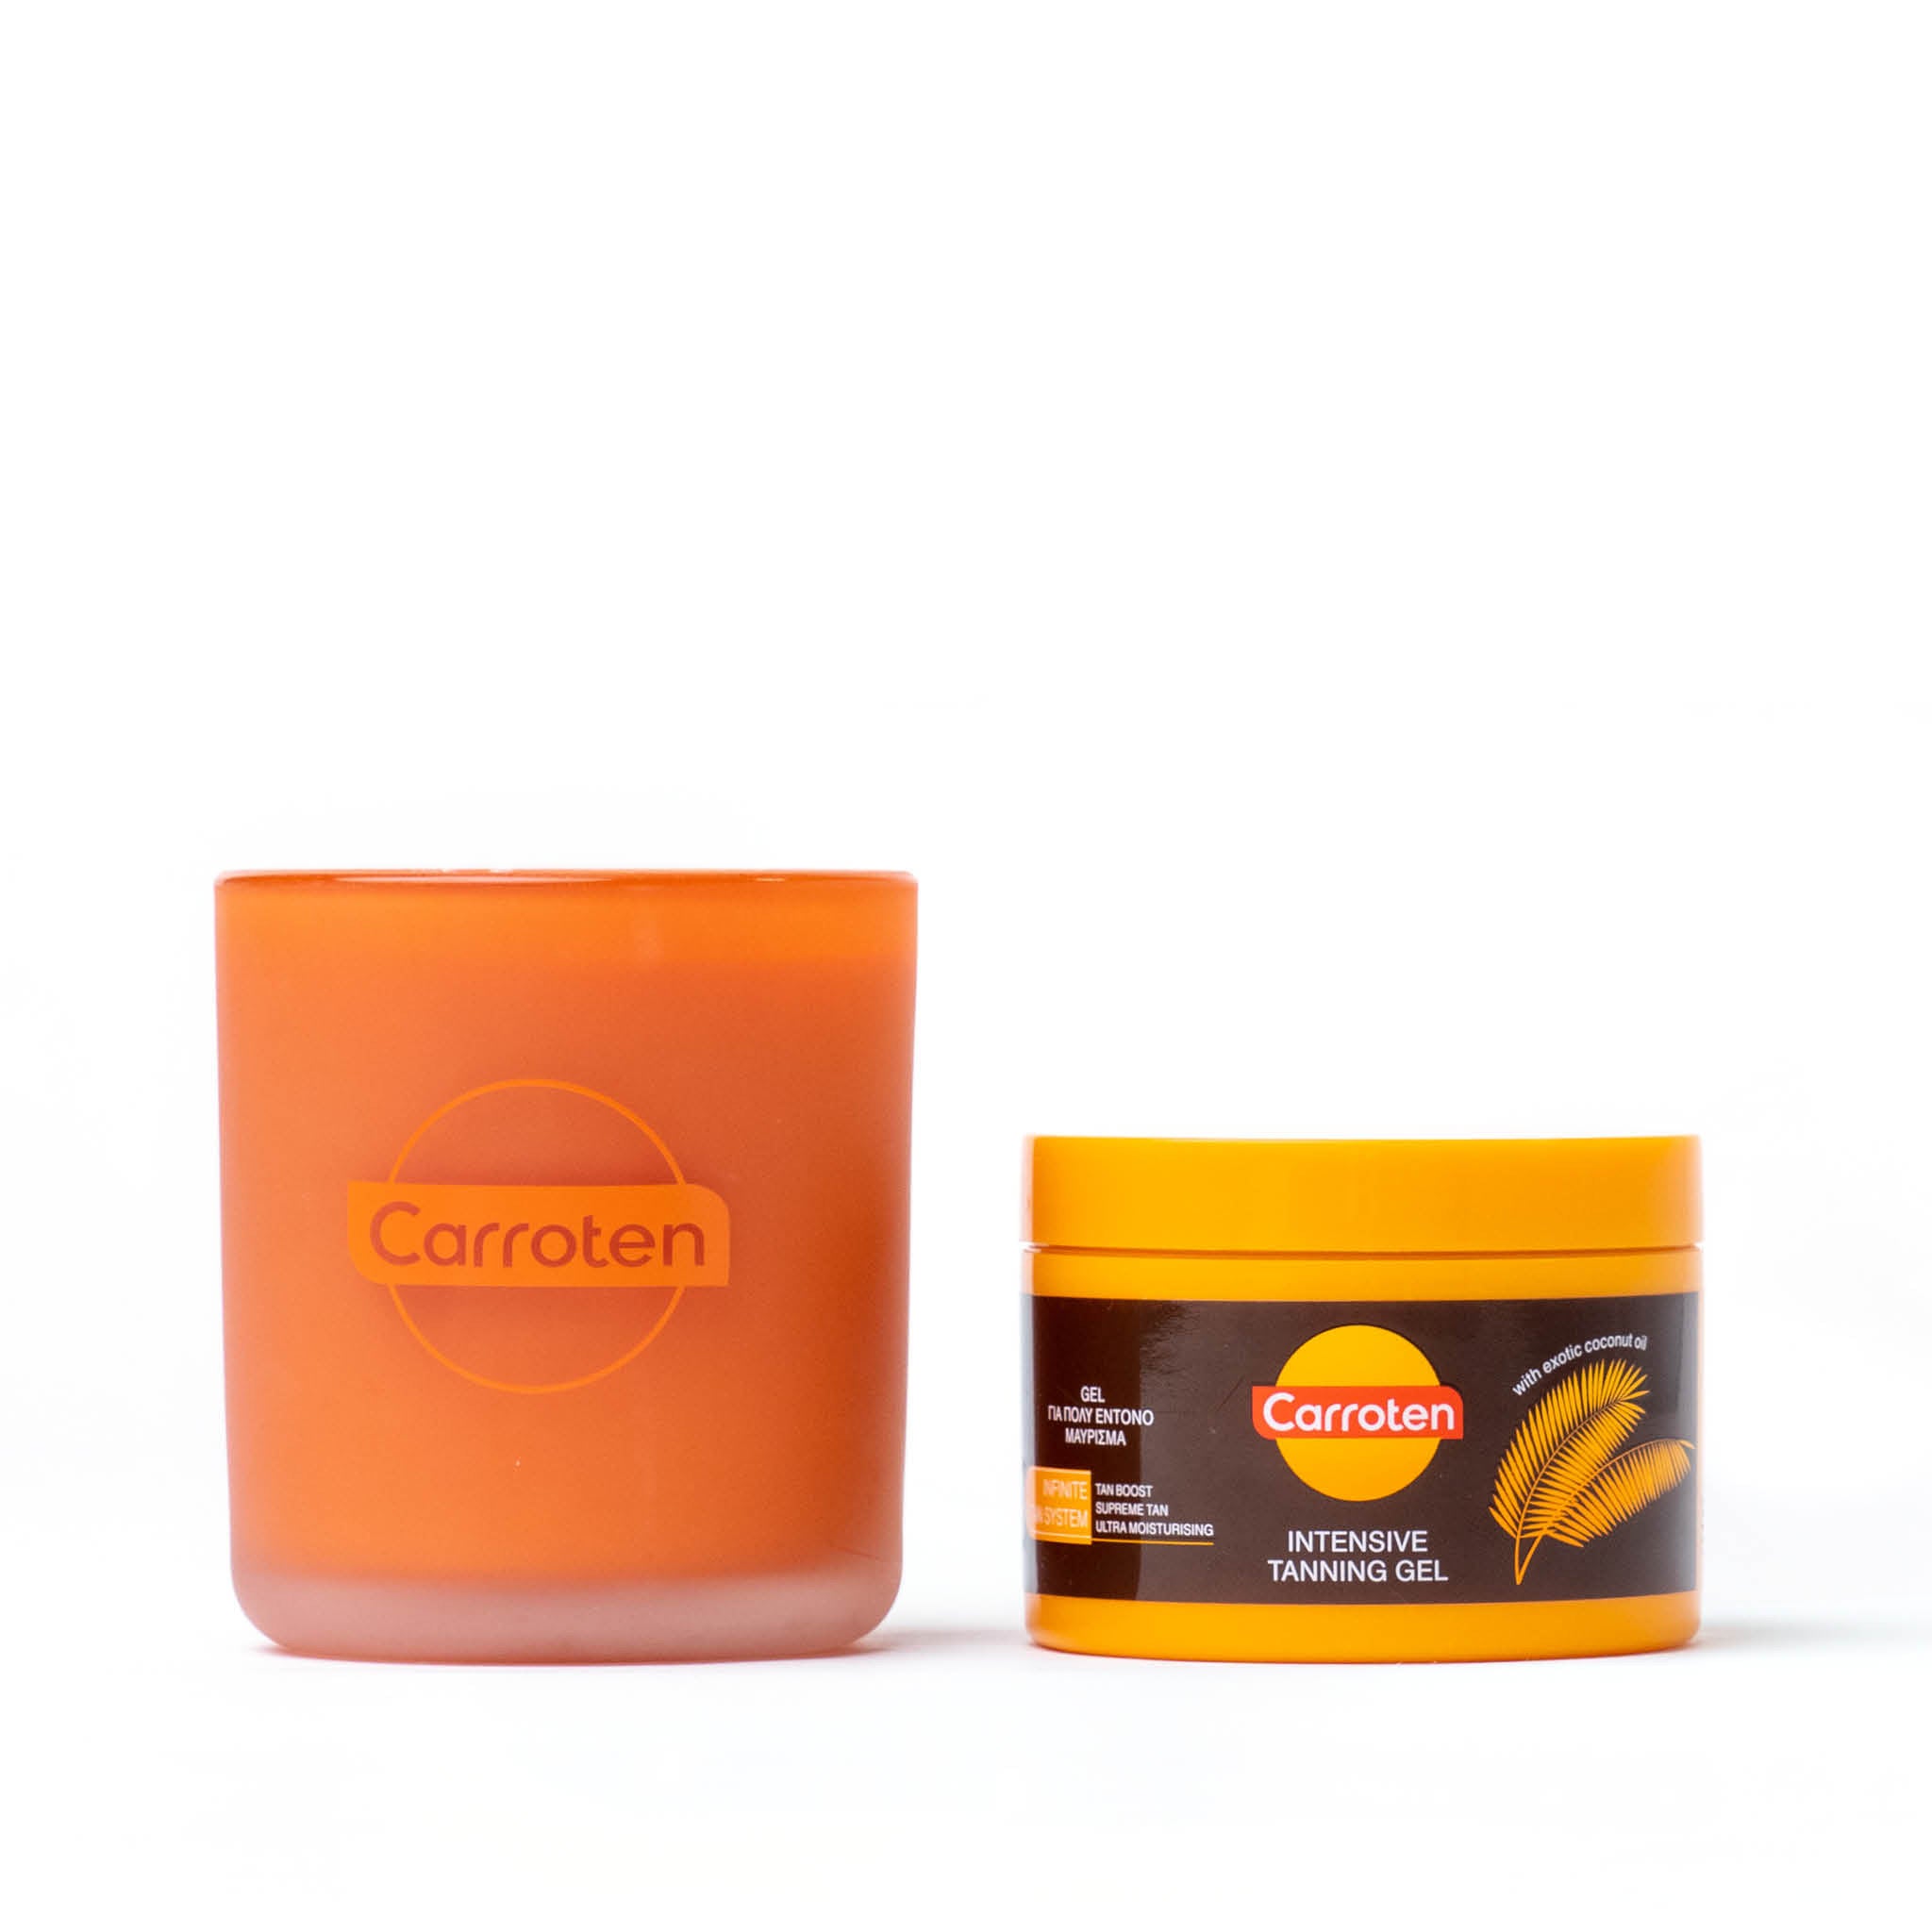 CARROTEN SCENTED CANDLE